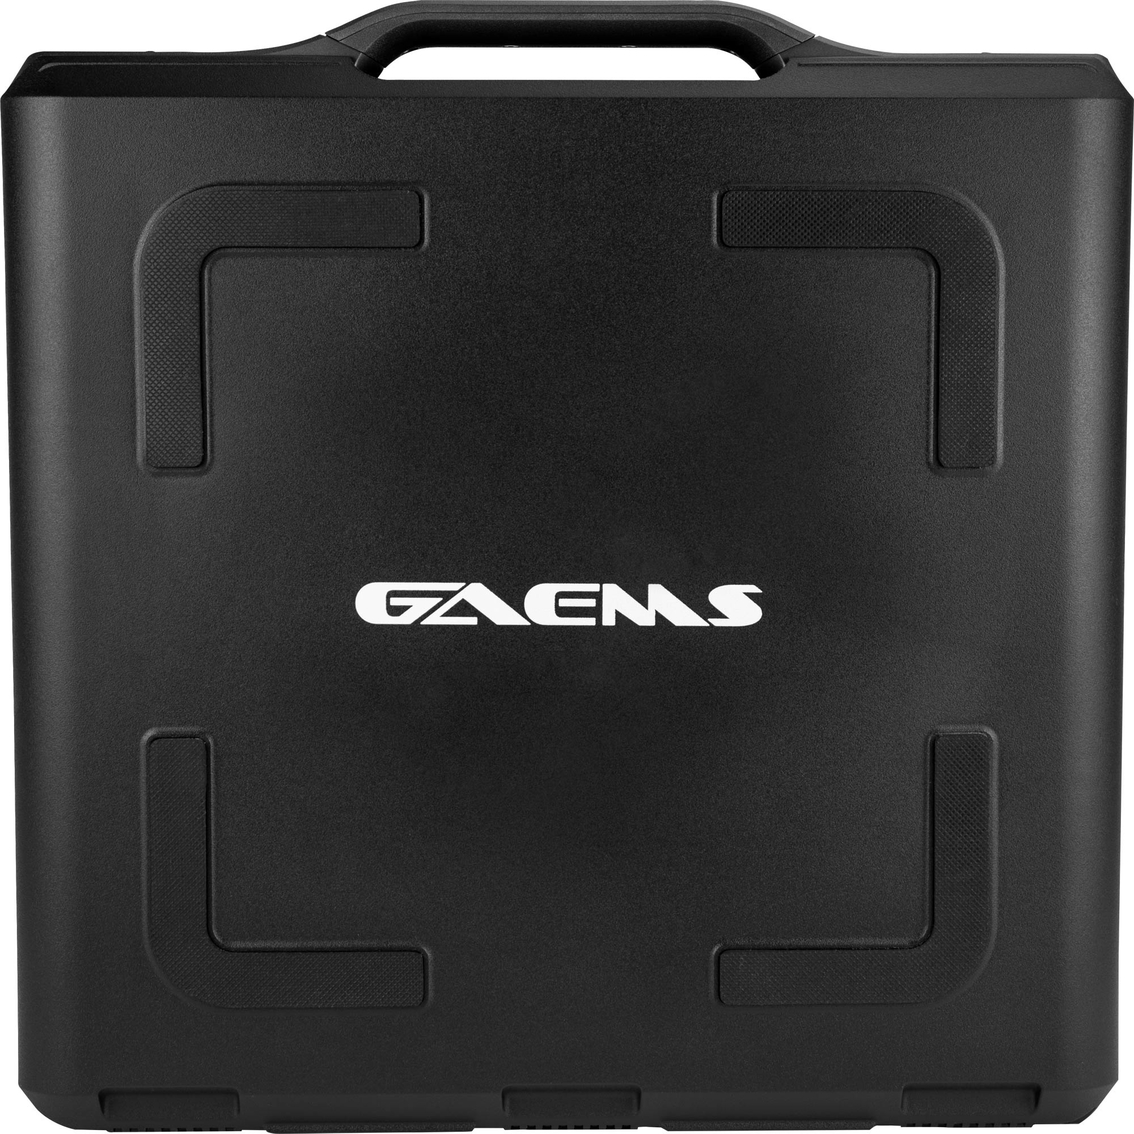 Gaems Sentinel Pro Xp 1080p Portable Gaming Monitor Hard Case Pc Gaming Accessories Back To School Shop Shop The Exchange